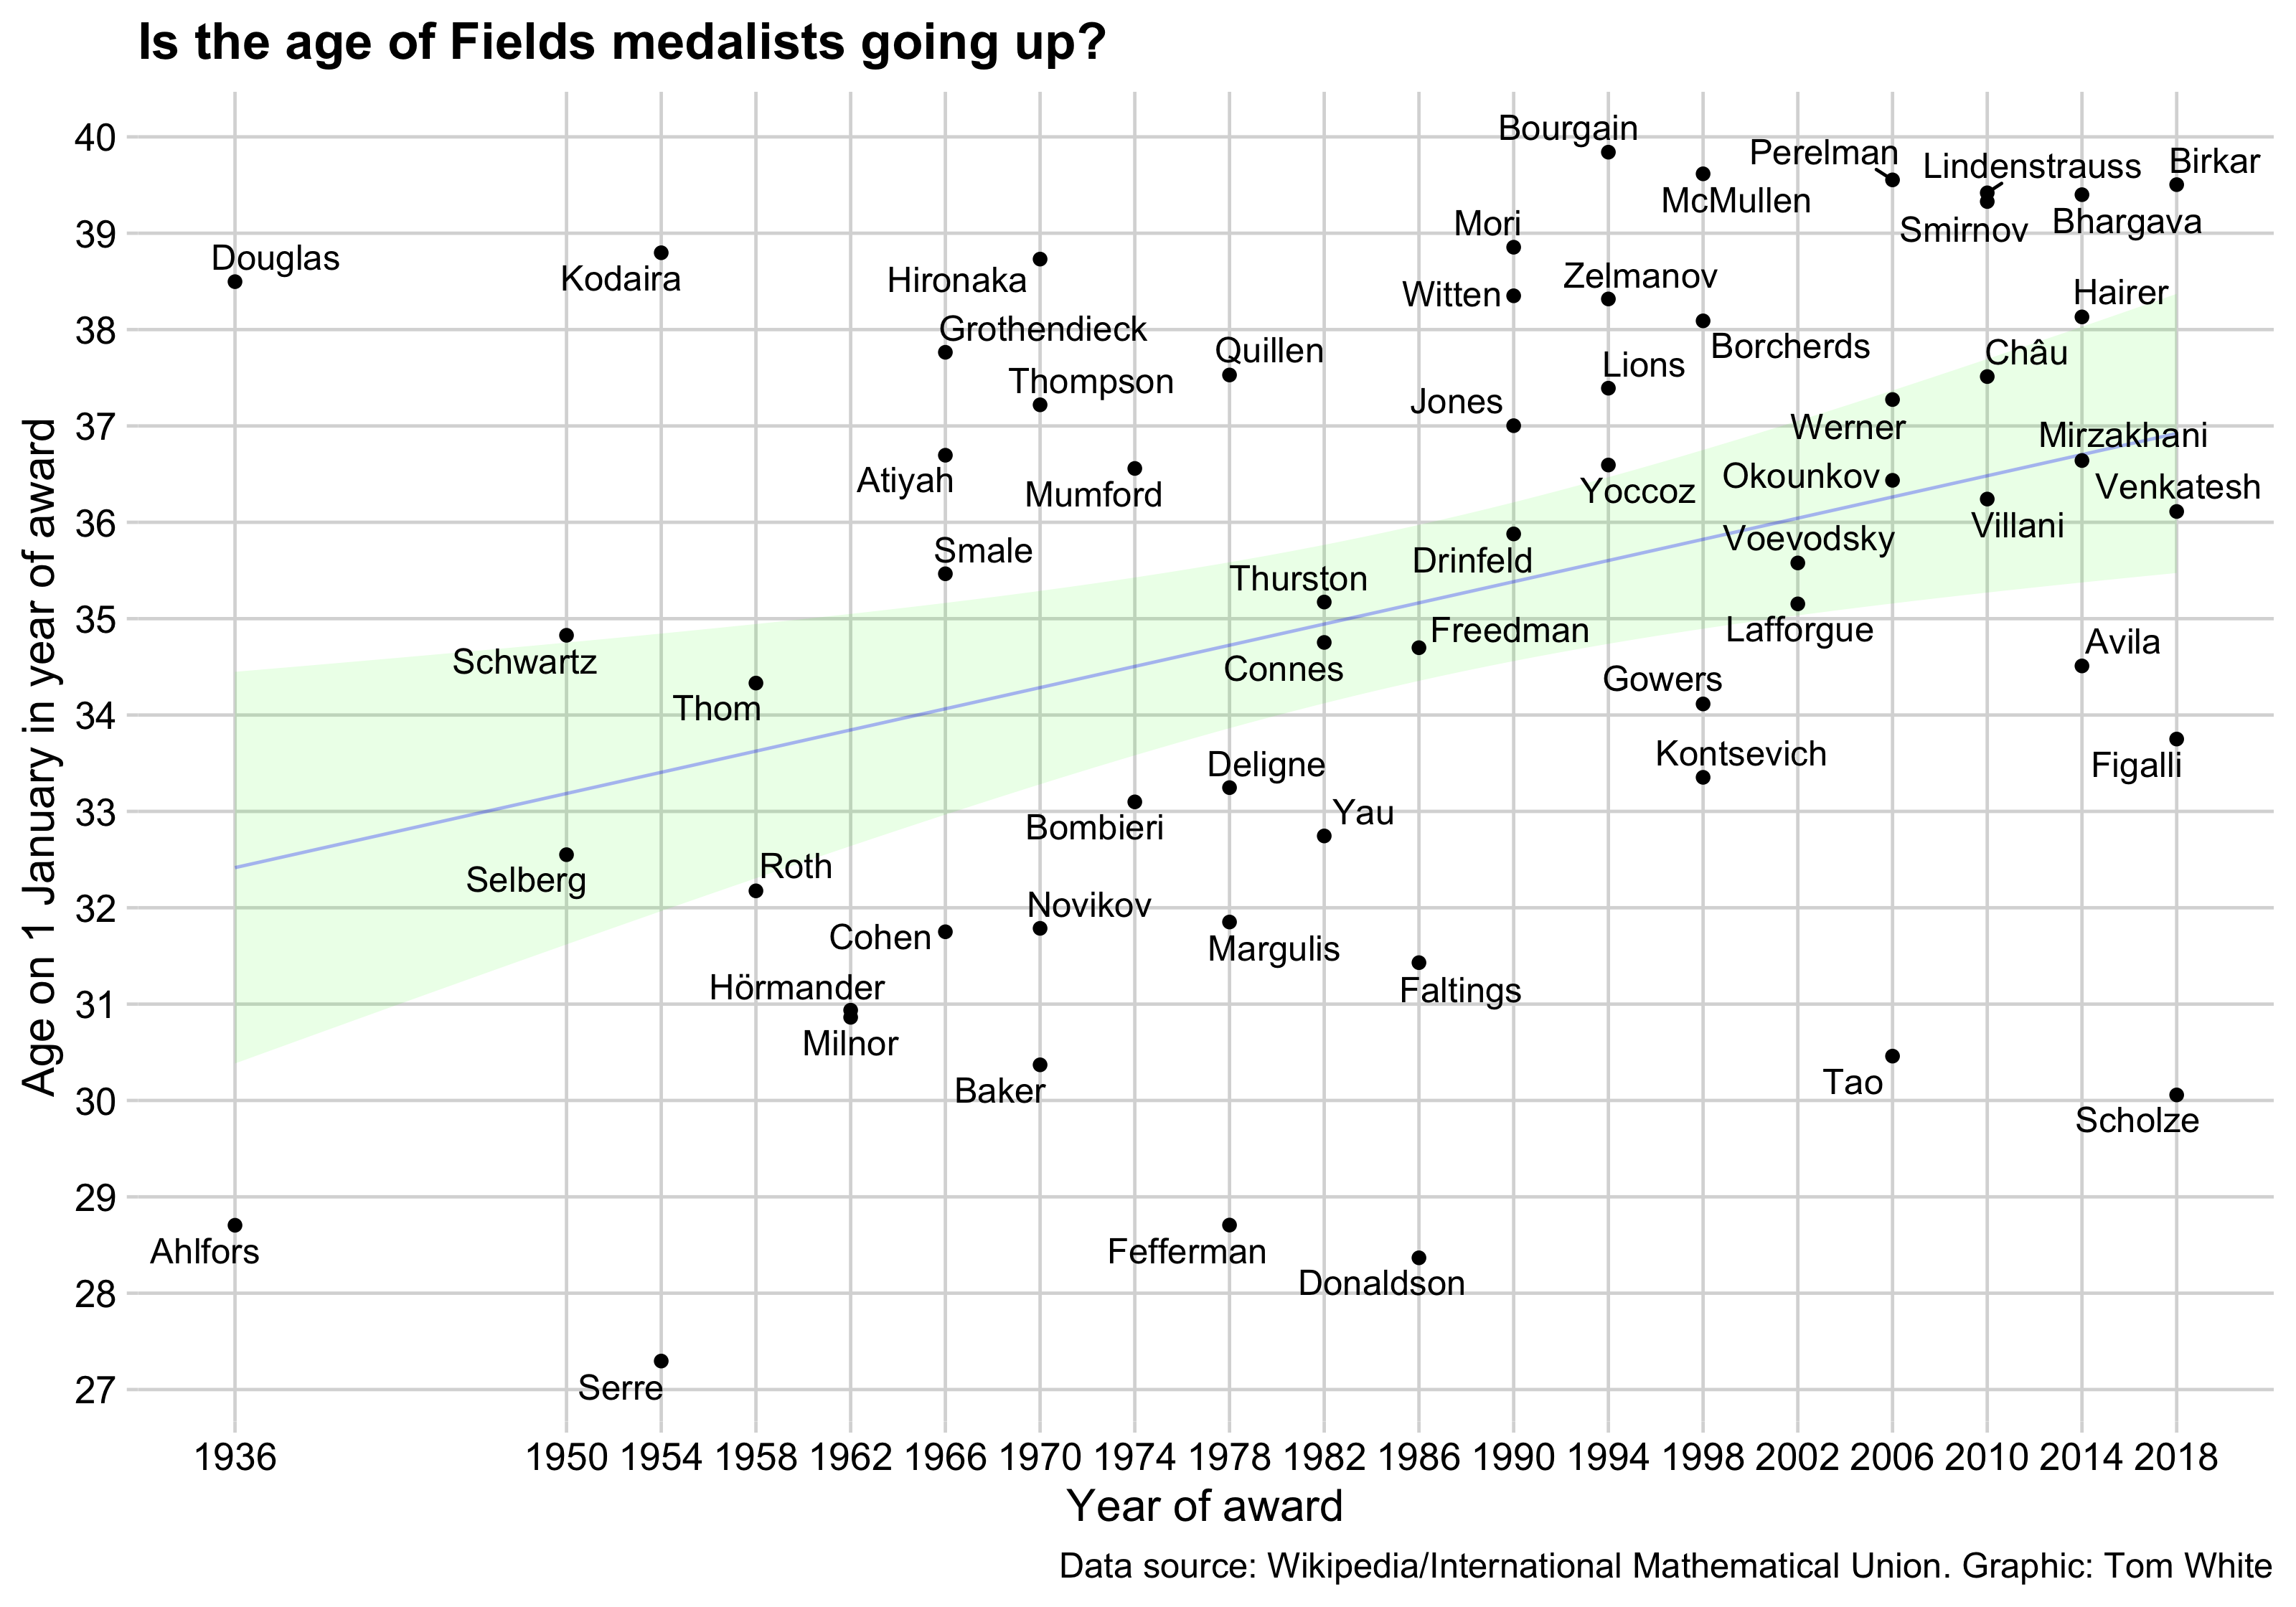 Is the age of Fields medalists going up?